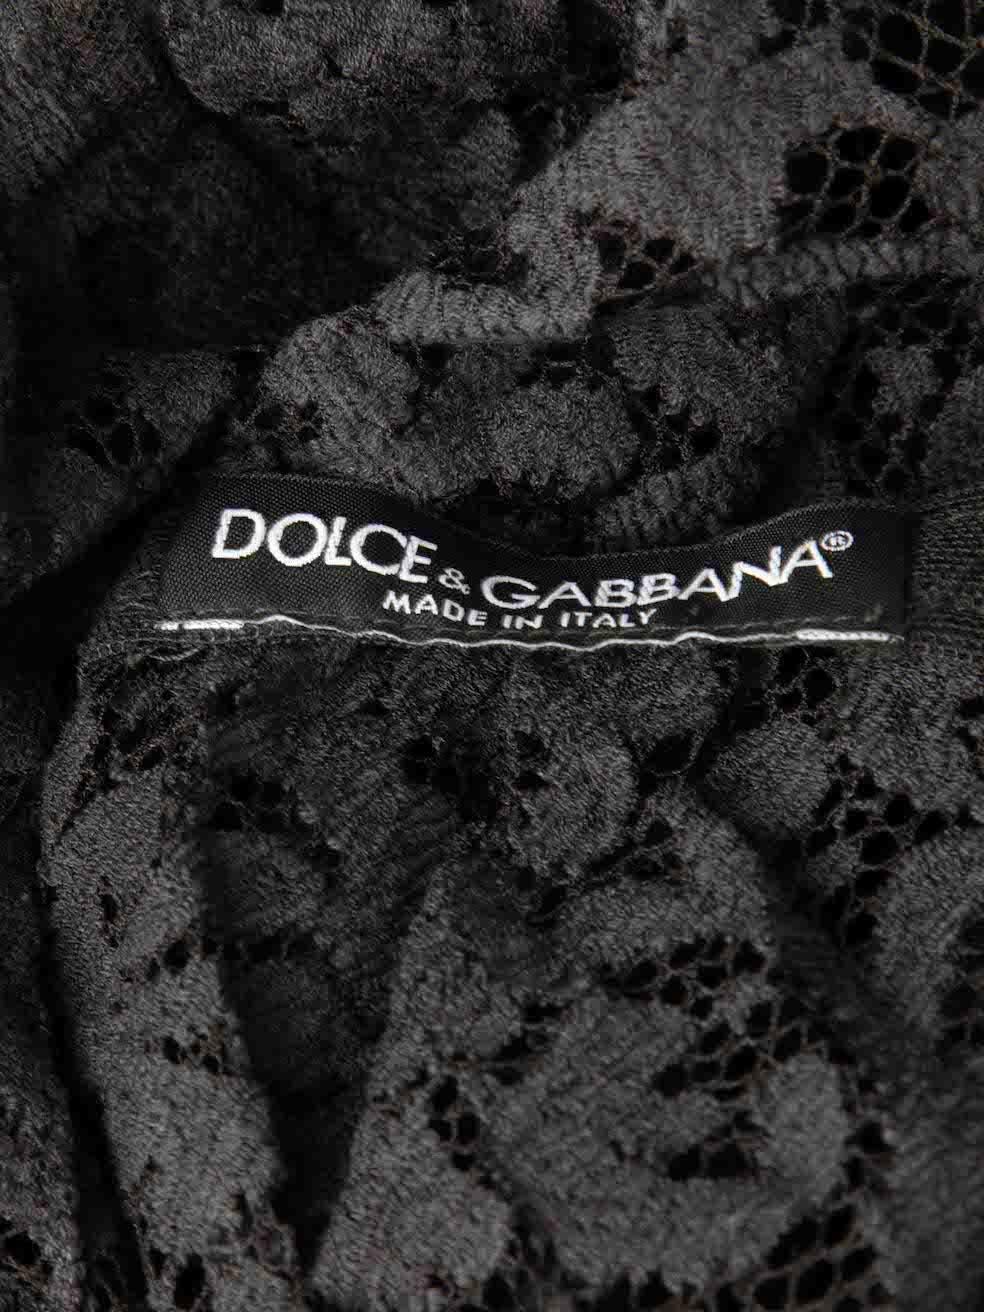 Dolce & Gabbana Navy Lace Ruched Dress Size S For Sale 3